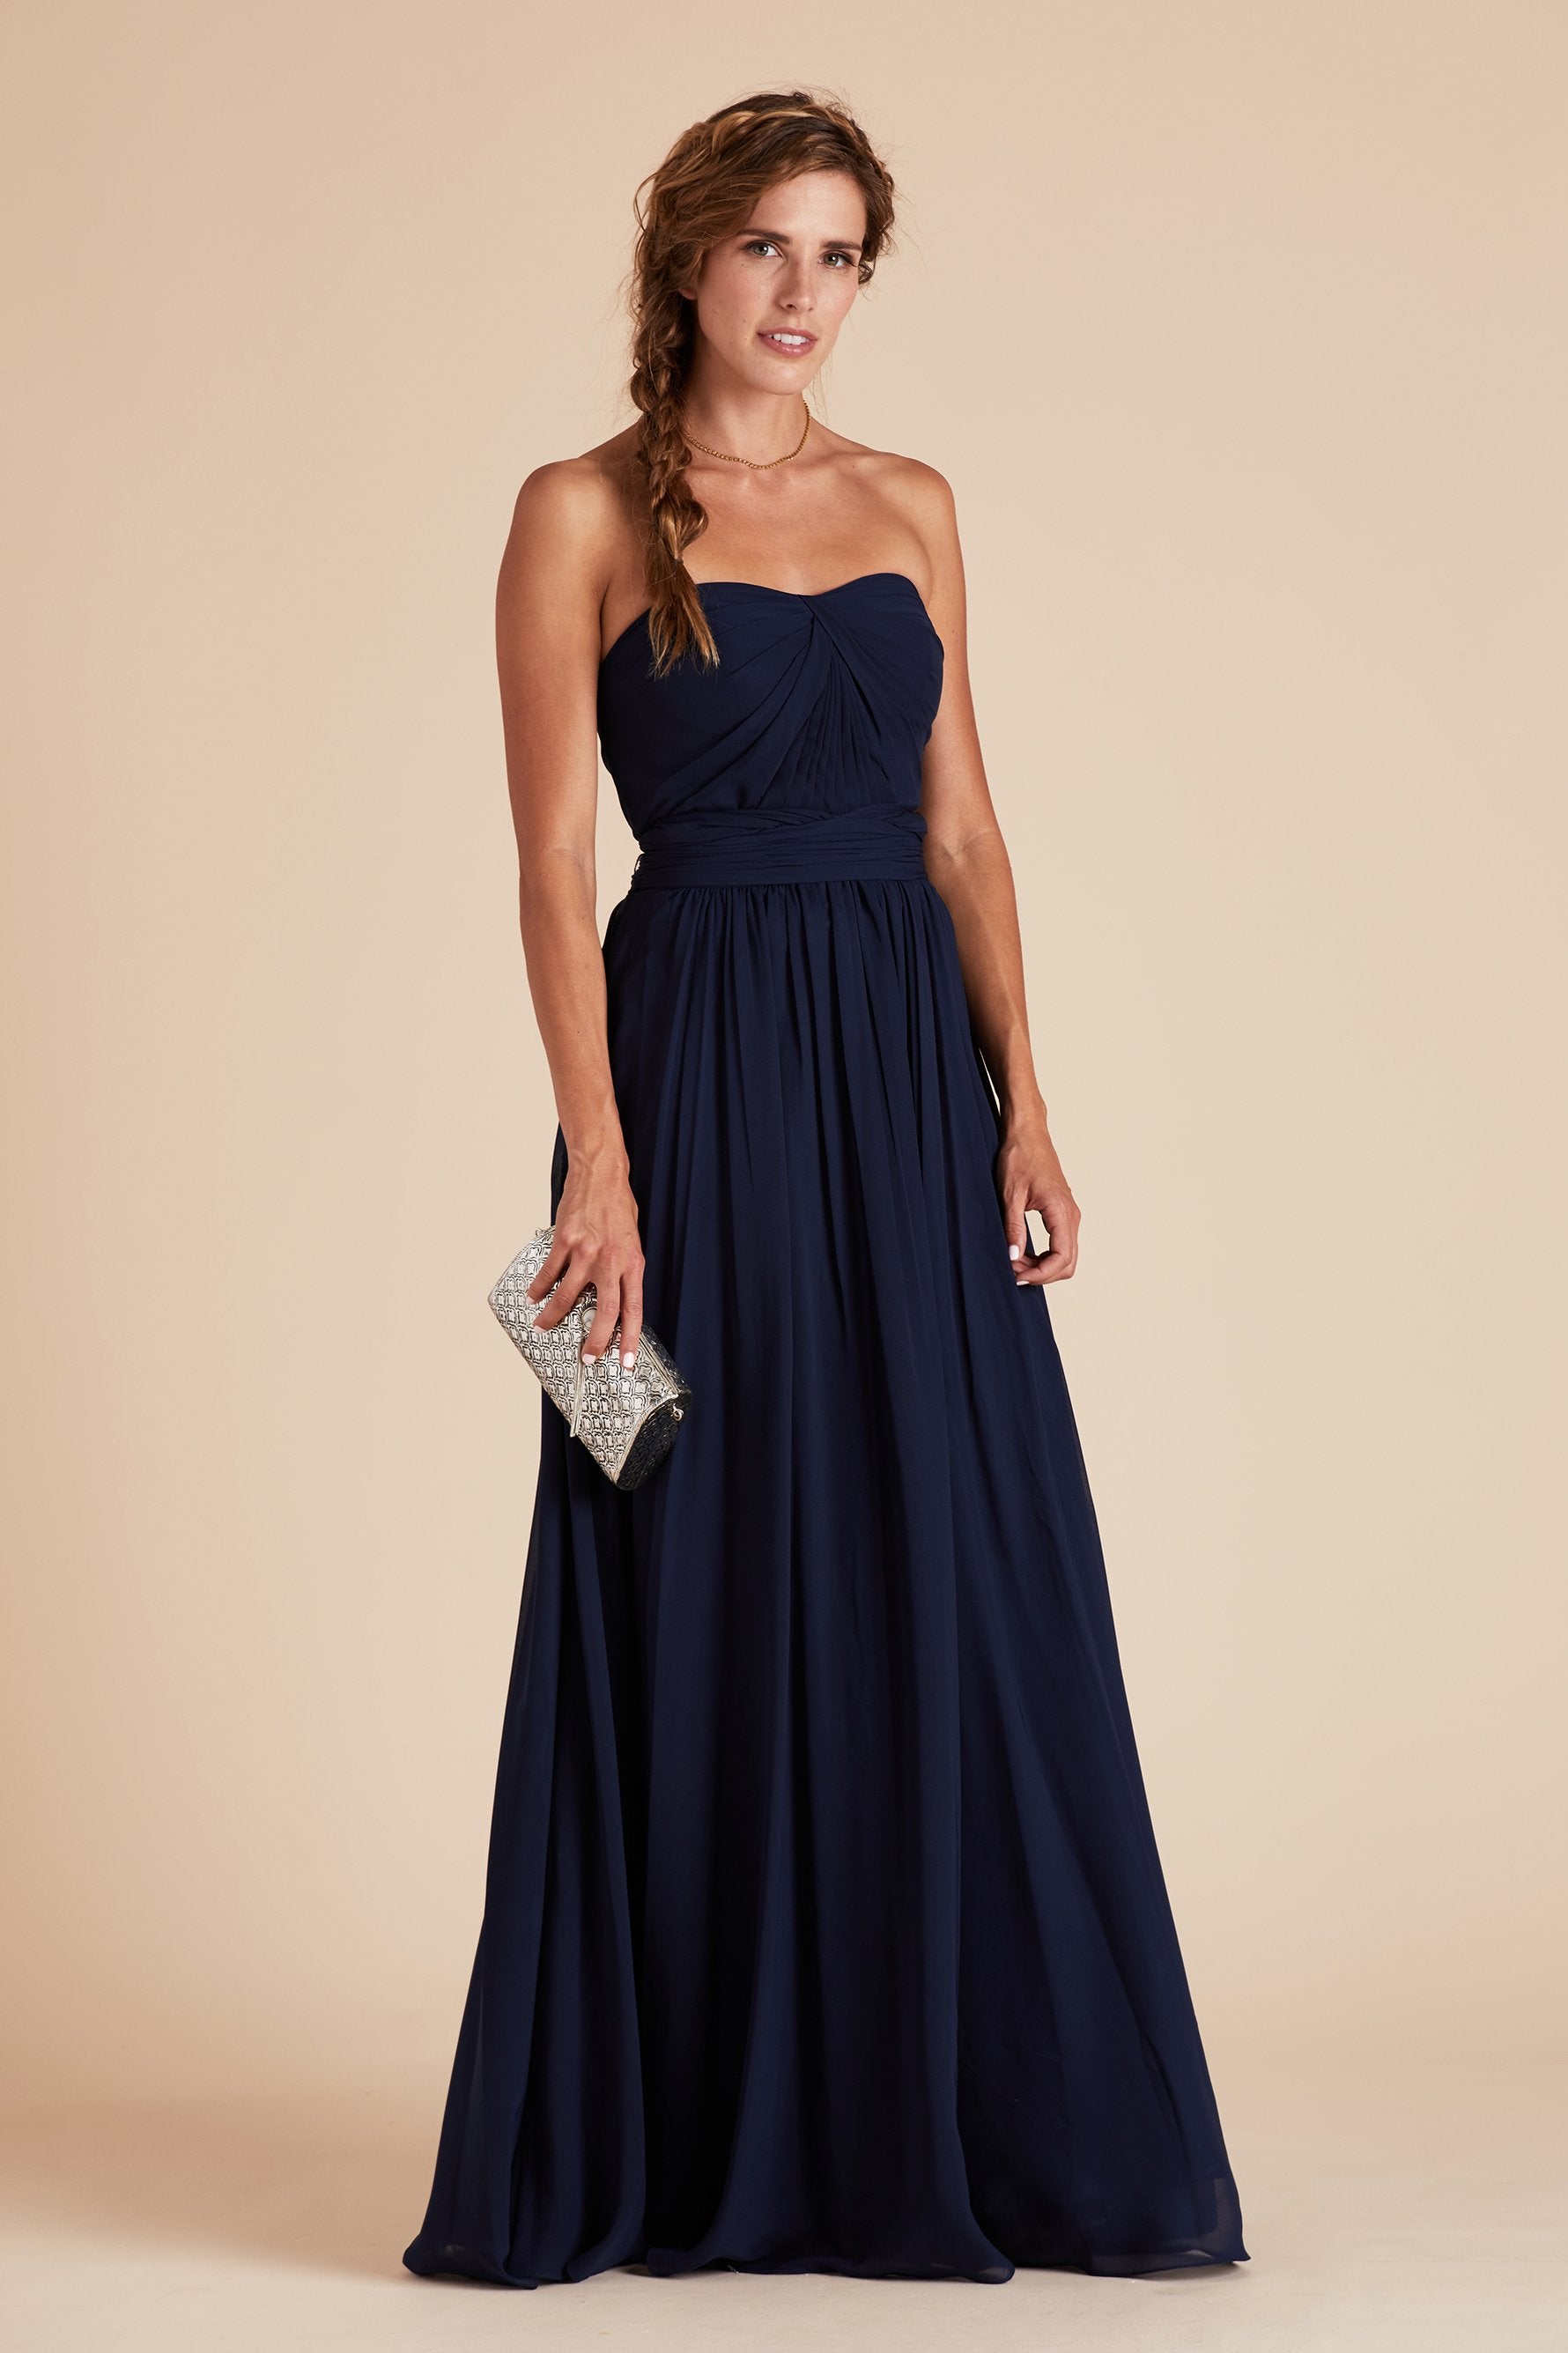 Grace convertible bridesmaid dress in navy blue chiffon by Birdy Grey, side view